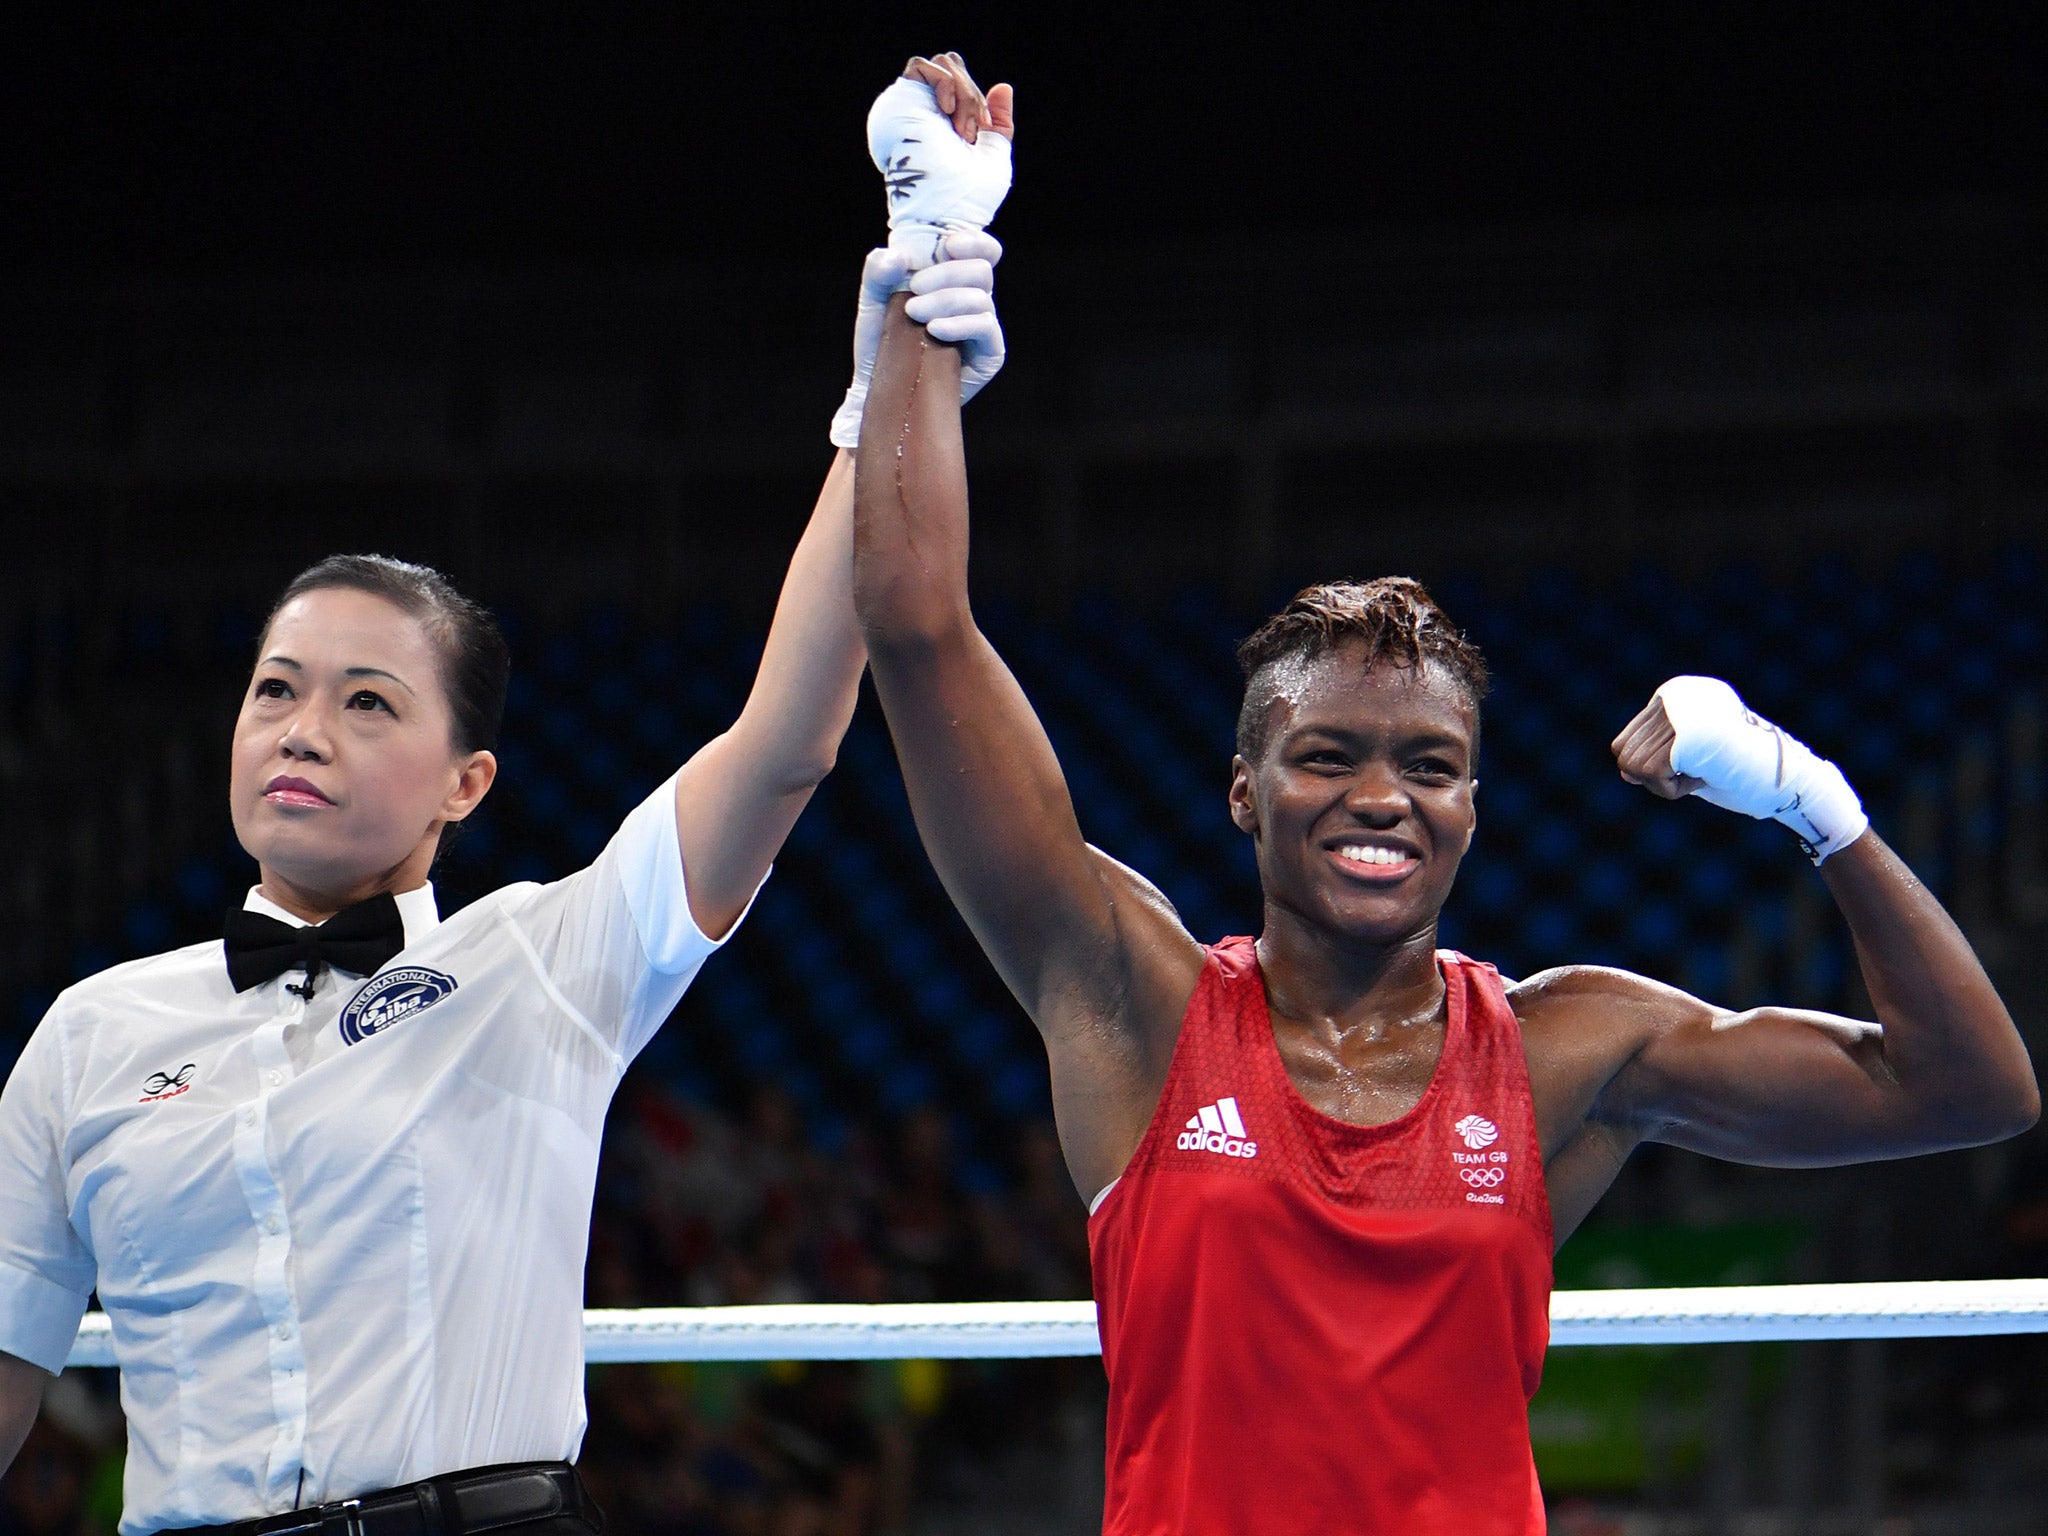 Nicola Adams: I'm Fighting For More Than Just Gold at Rio Olympics